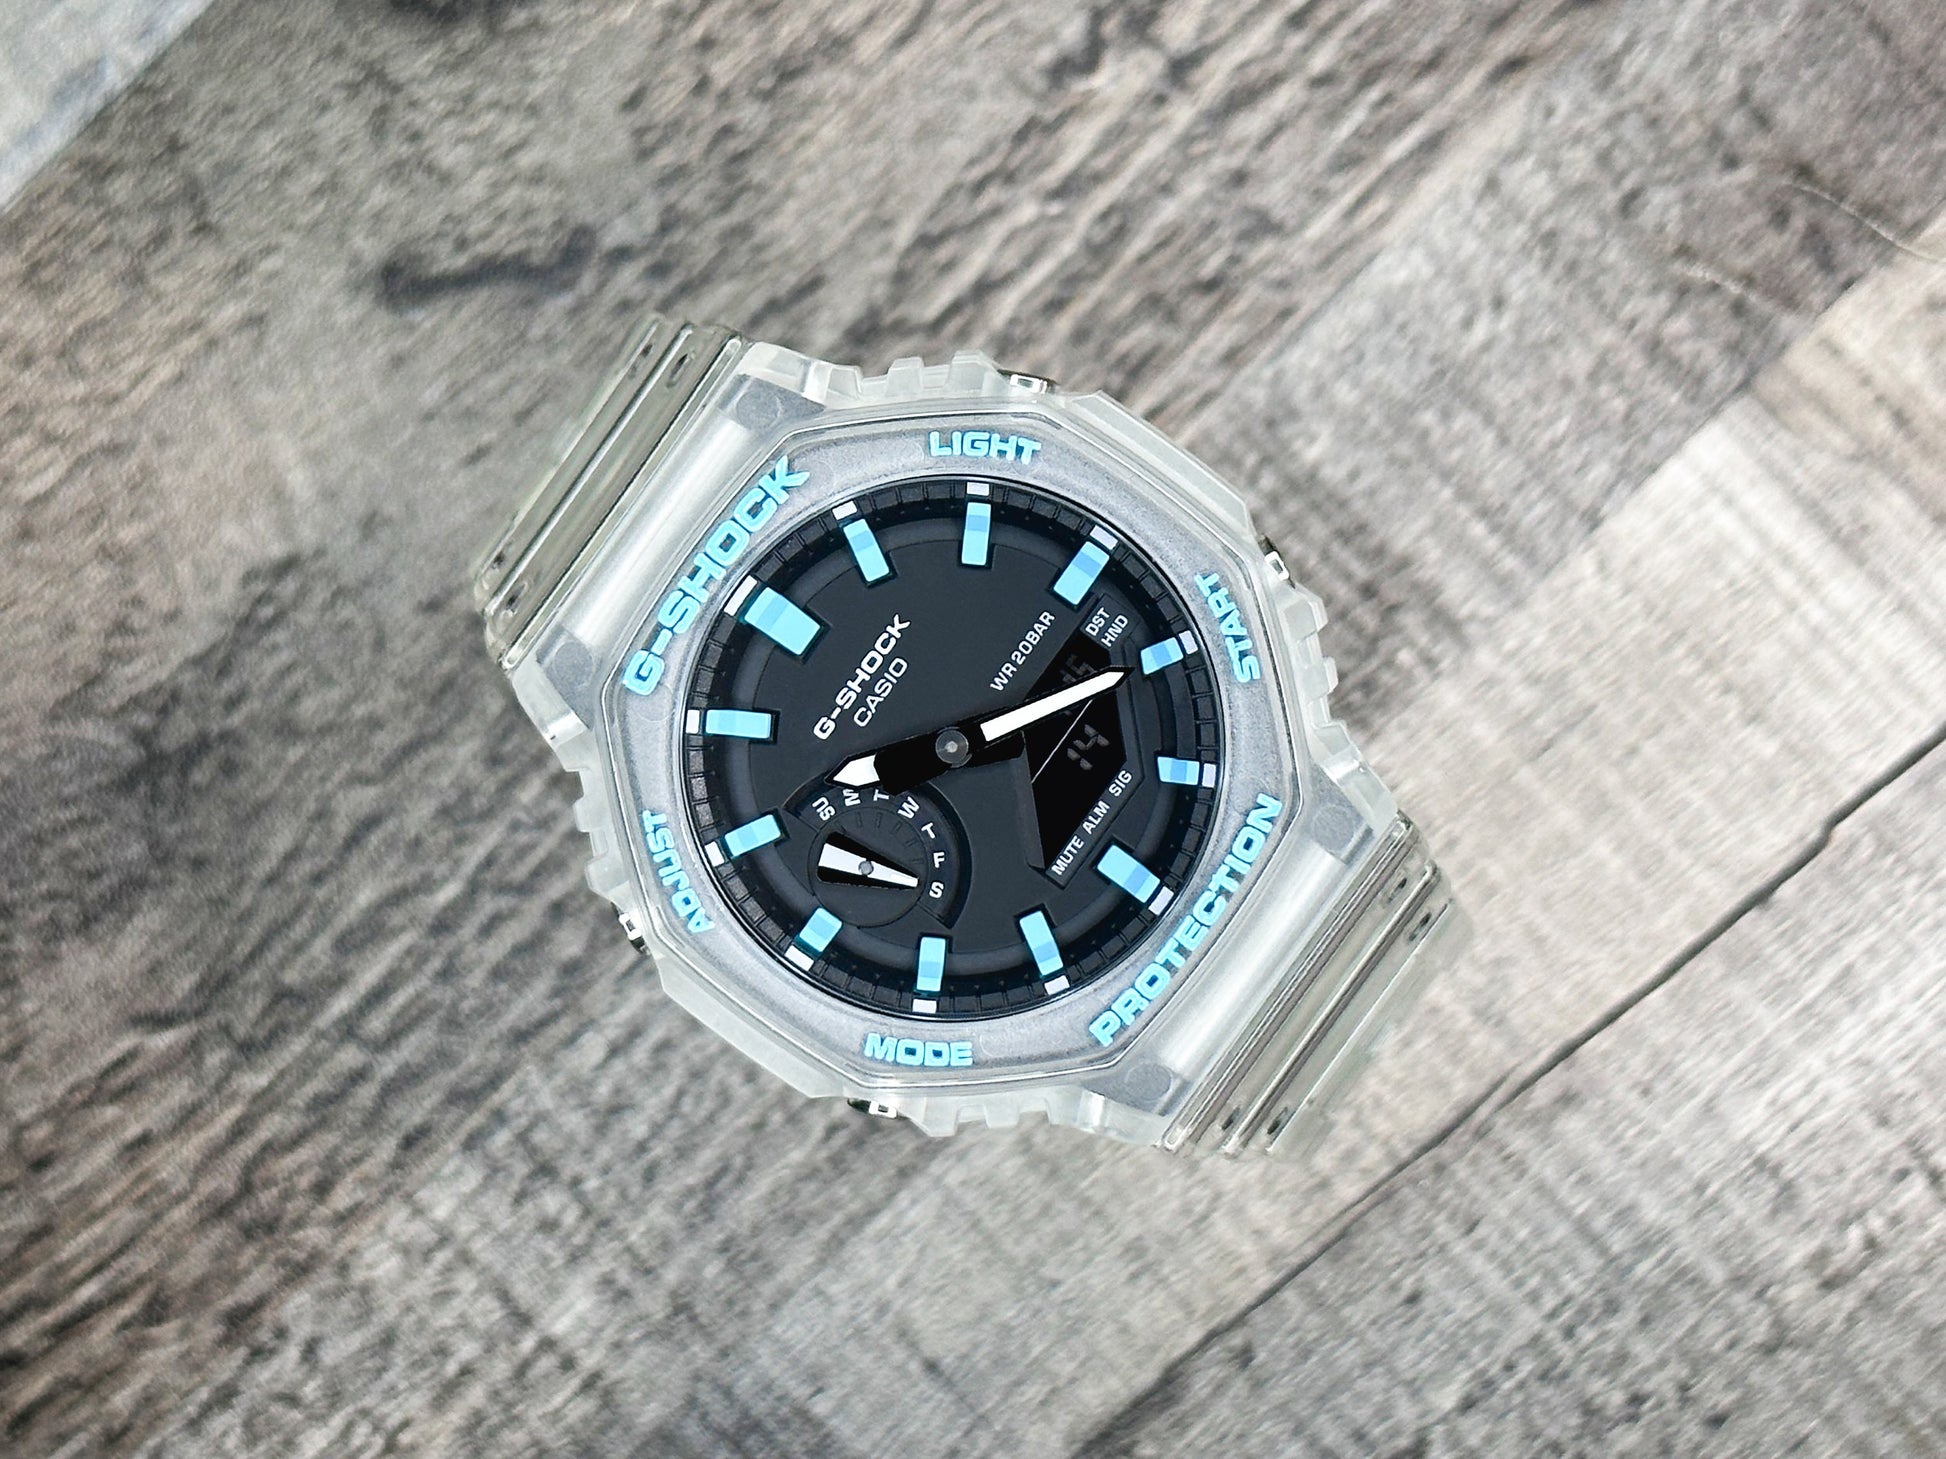 G-Shock CasiOak "Sky Blue Jelly" - Clear/Blue Hand Painted Genuine Casio GA2100 - Carbon Core Protection - Optional Sapphire Crystal